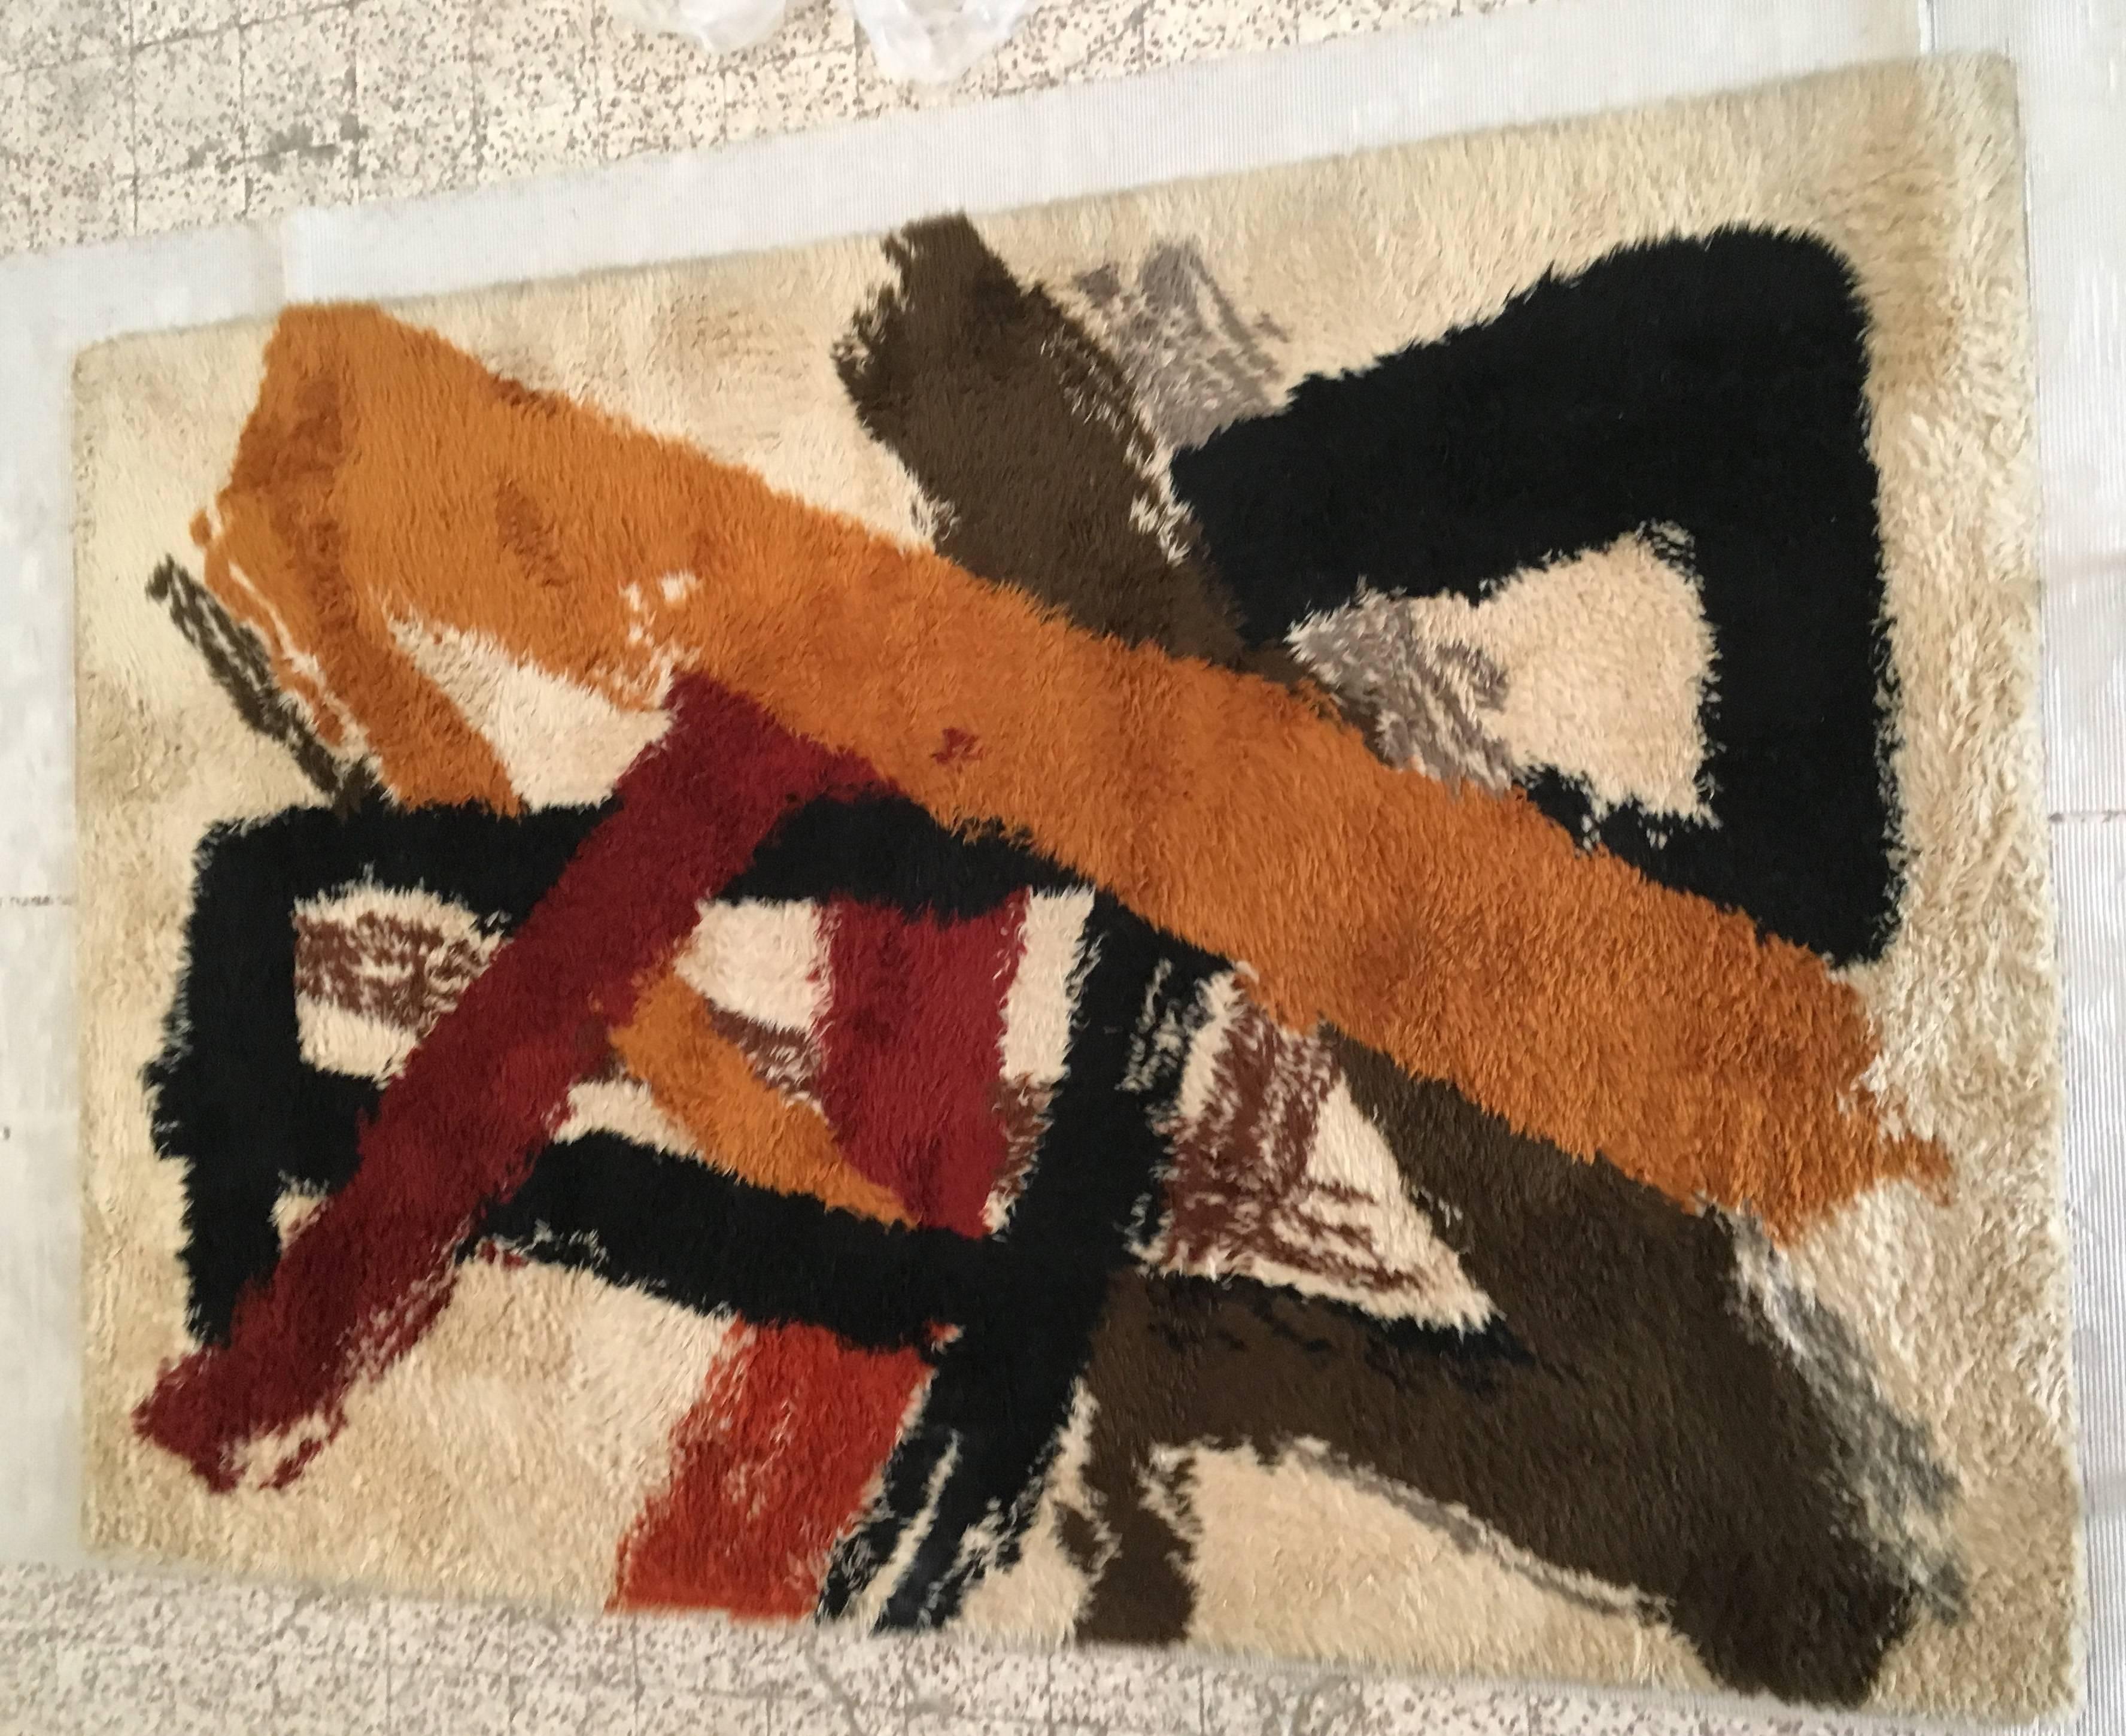 A midcentury abstract iconic carpet manner of artist Franz Kline.
Bearing a tag ‘’Abstractions’’ made in England for ‘Concept International Design Studio ‘ of new York. Under the artistic director John Freeman.
The sophisticated abstract pattern